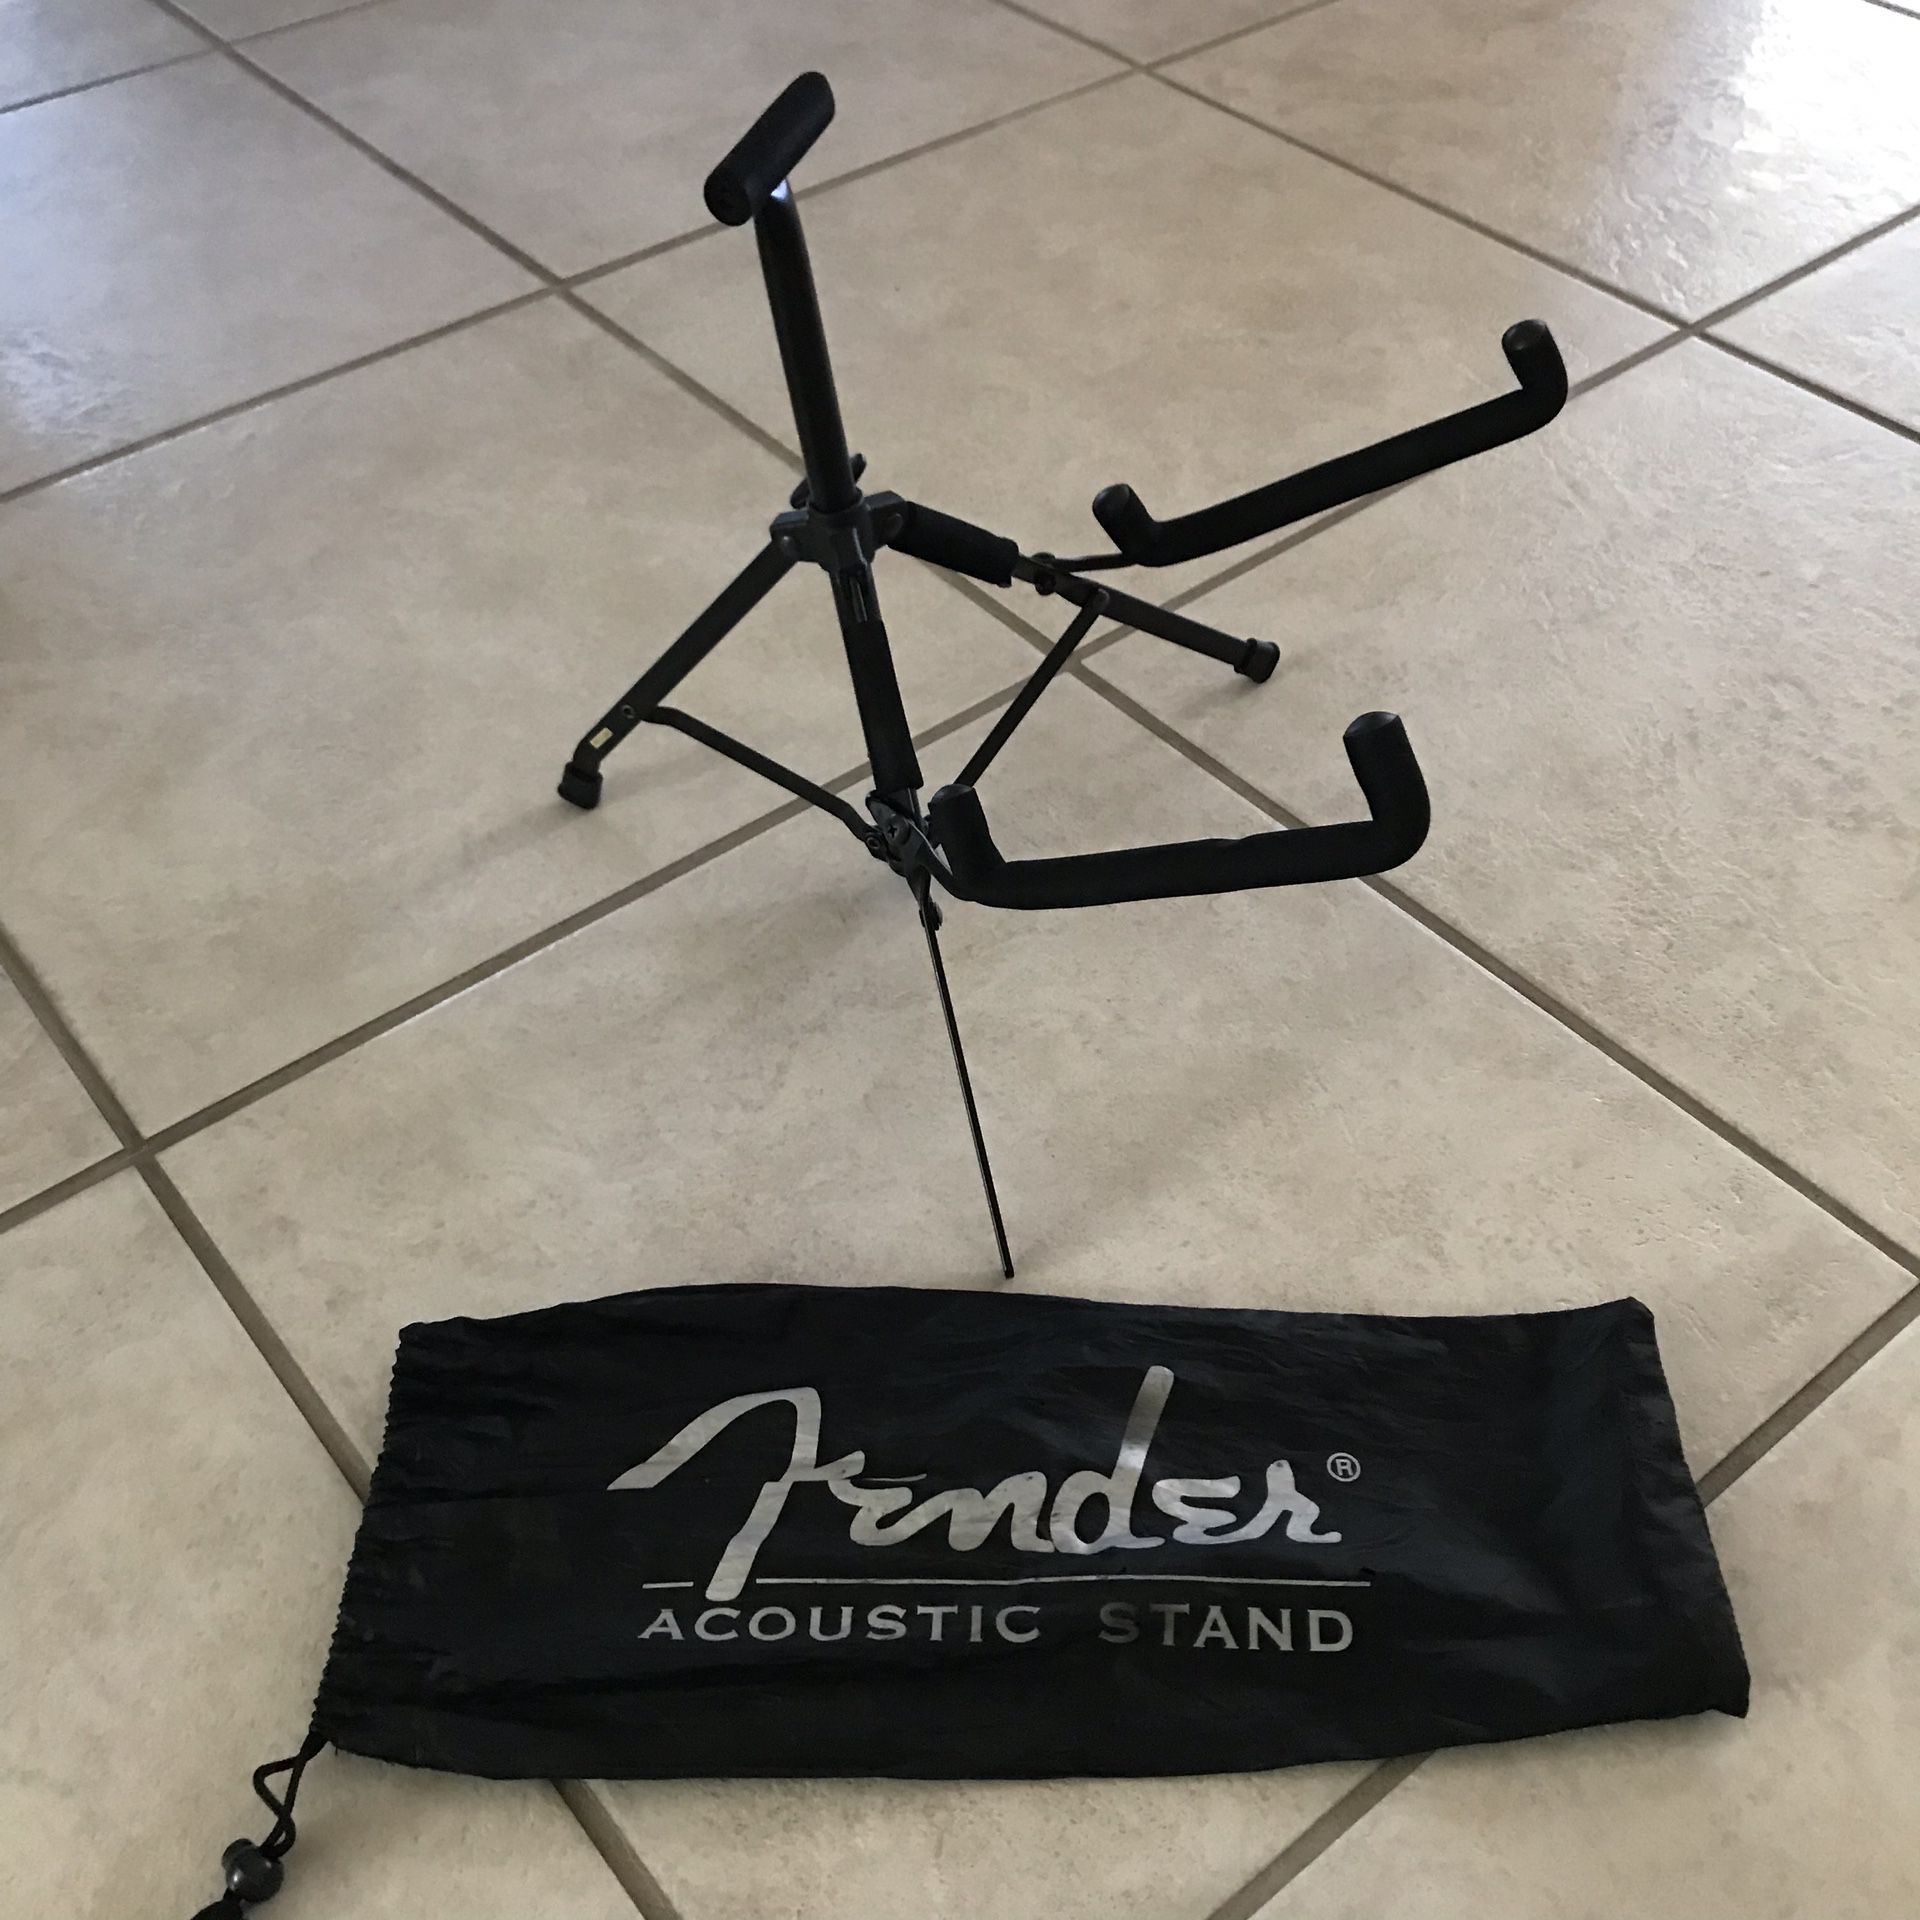 Folding Fender acoustic guitar stand( portable)